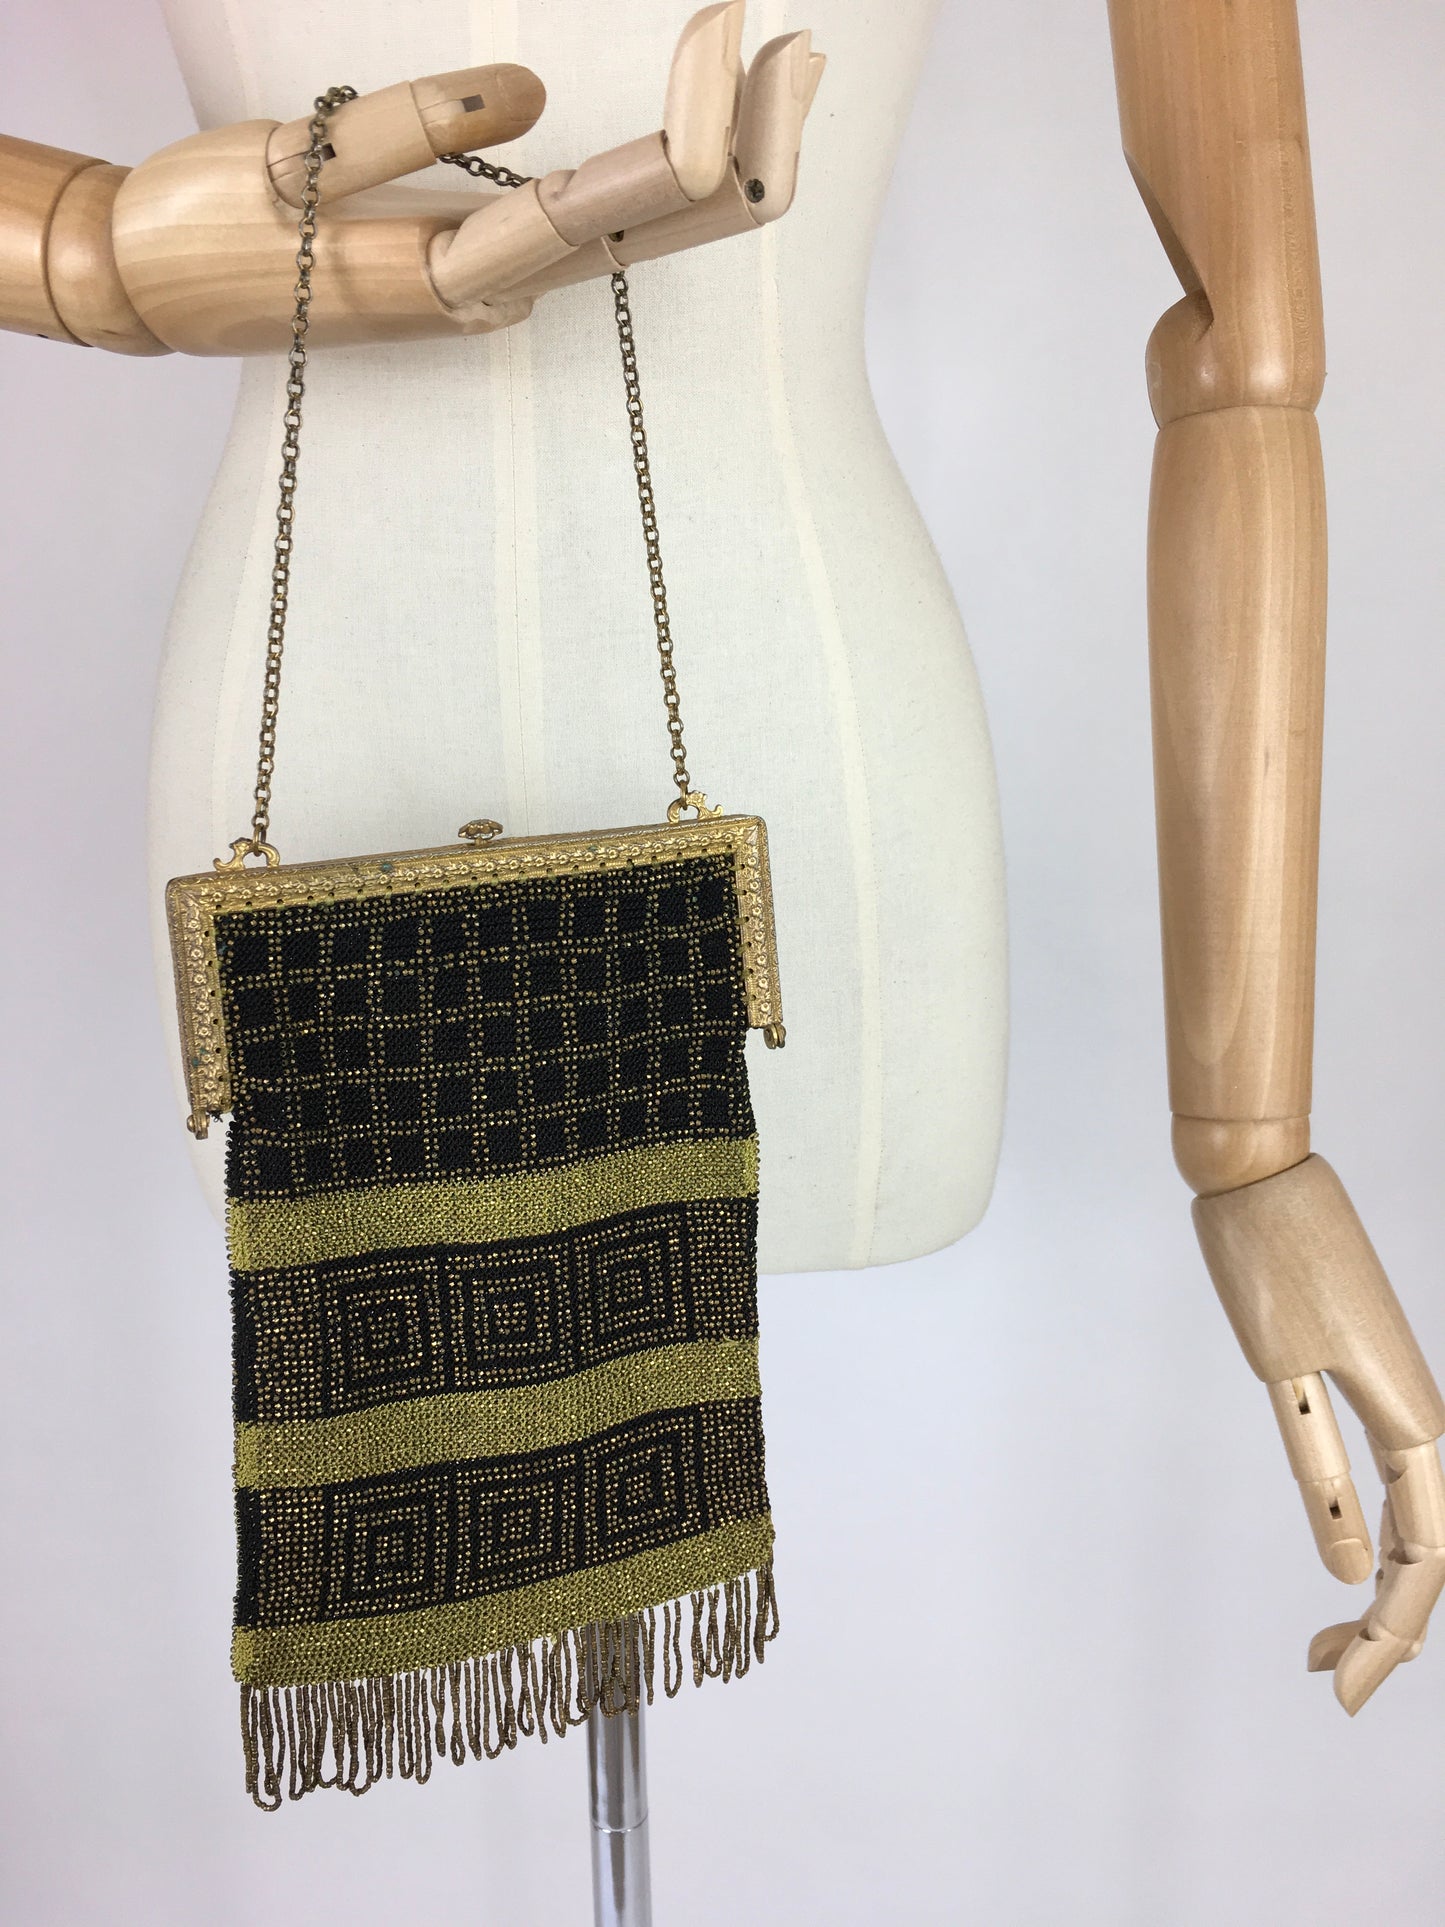 Original 1910s Chain Beaded Bag - In A Lovely Deco Pallet of Black and Gold